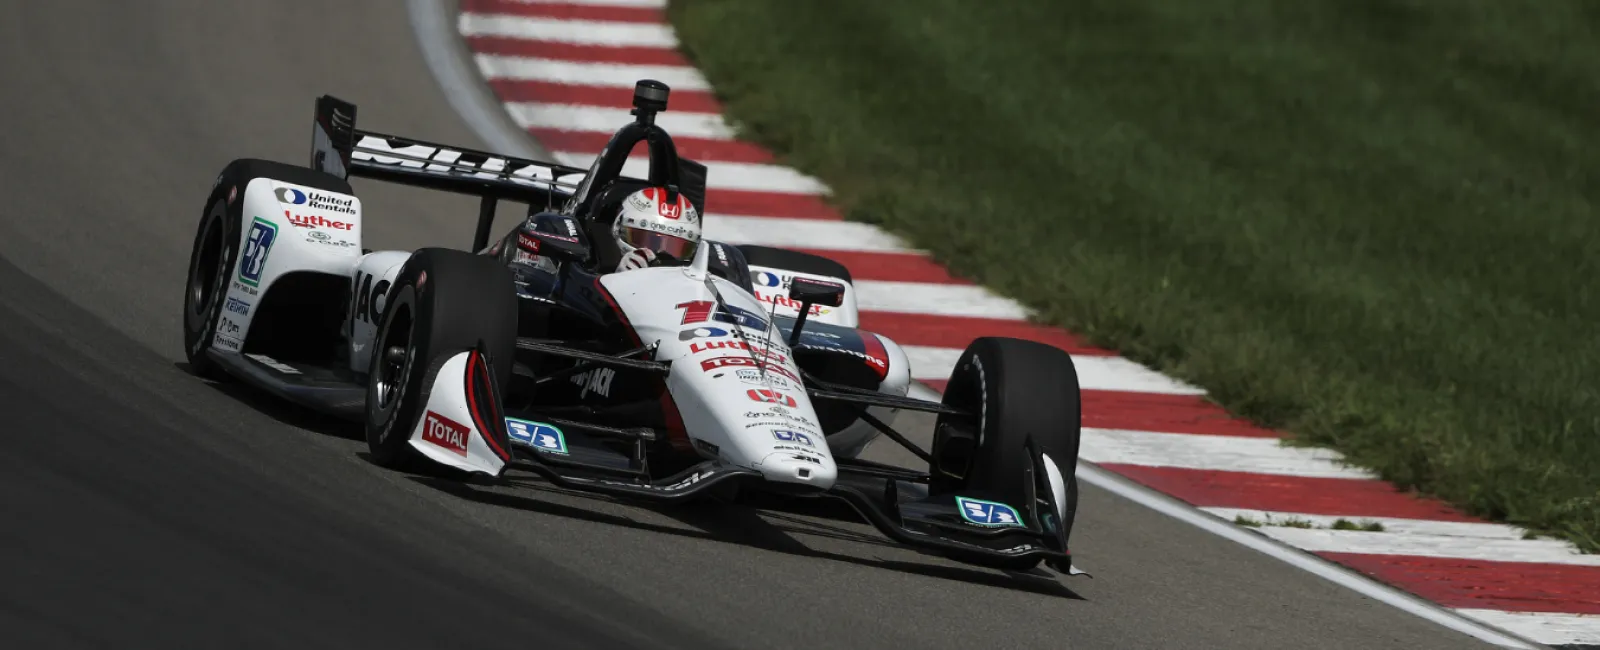 Exhaust Secondary Failure Retires Rahal's Day at Gateway